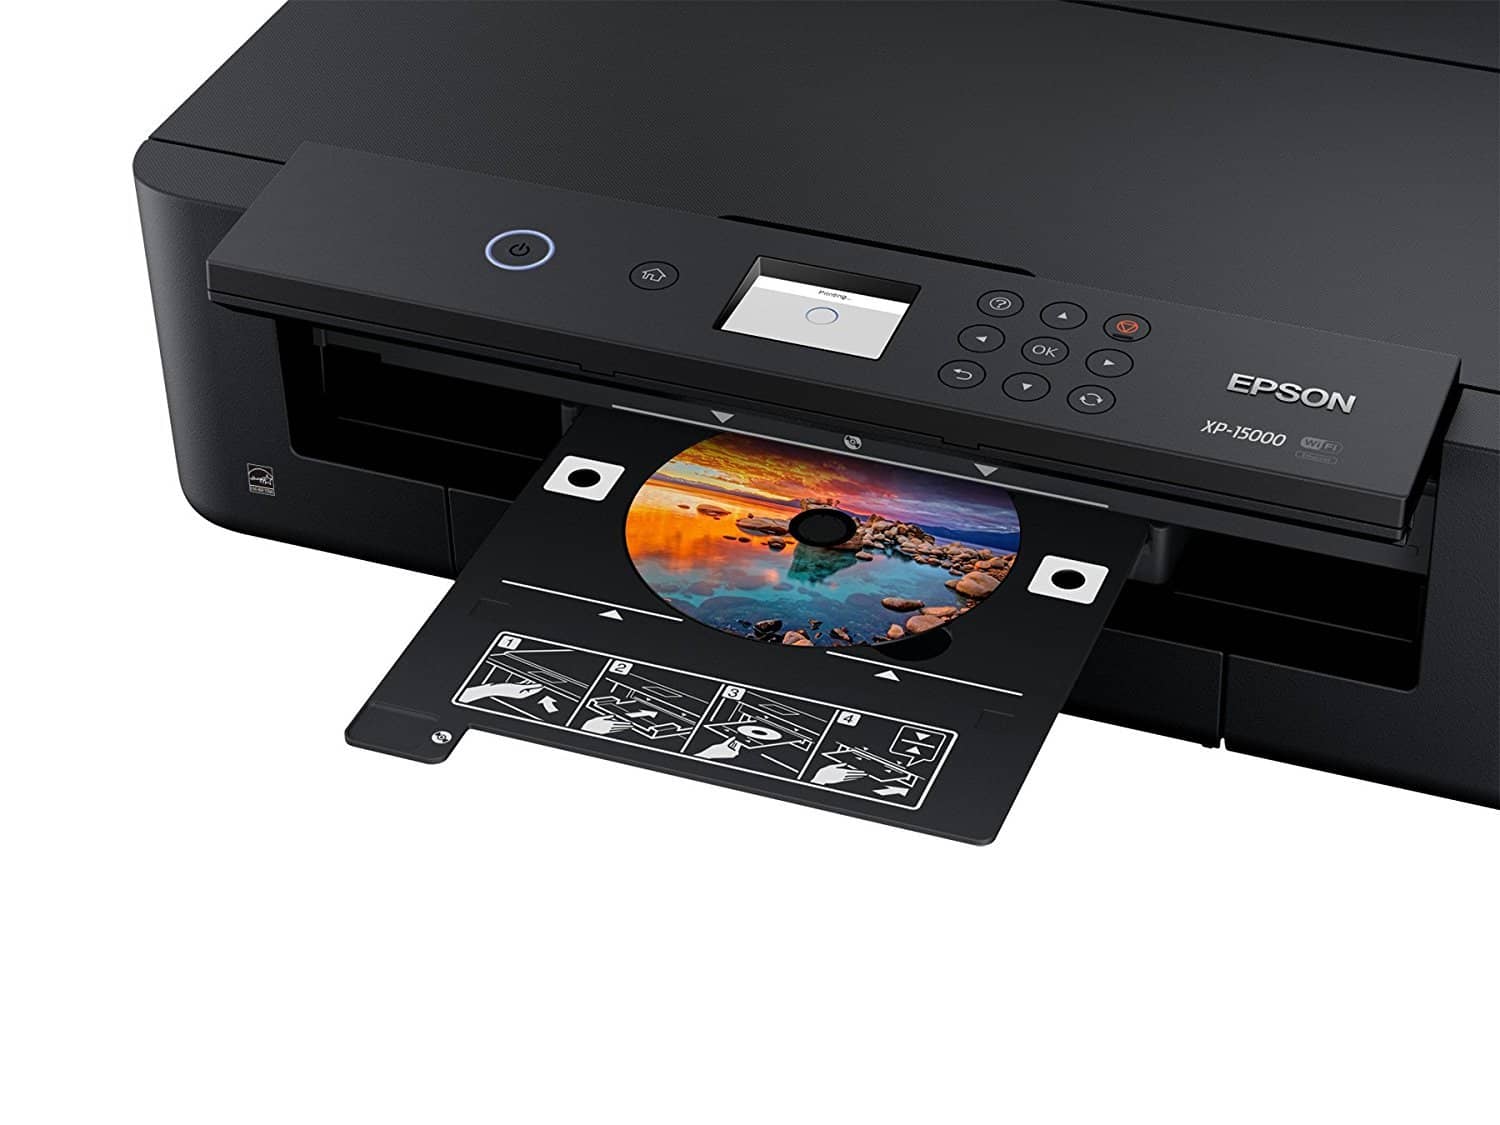 Expression Photo HD XP-15000 Wireless Color Wide-format Printer